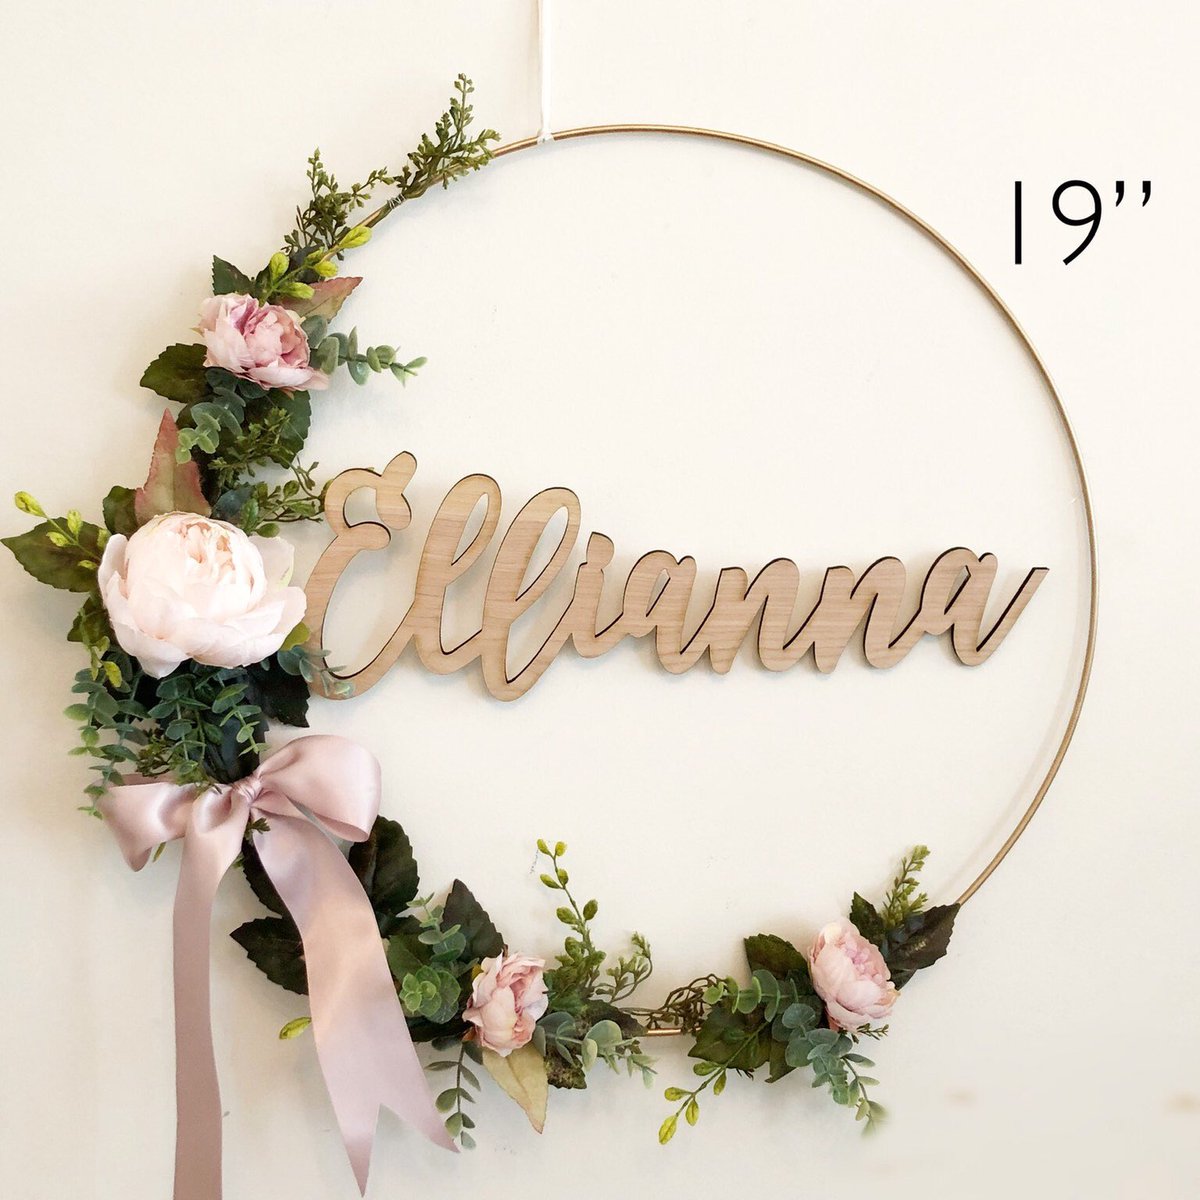 Excited to share this item from my #etsy shop: 19' Nursery Wreath With Name - Baby Shower Hoop Wreath - Baby Nursery Wreath - Floral Wreath Backdrop #babyshower #nurserywalldecor #homedecor #girlnurserywreath #modernstylewreath #eucalyptuswreaths etsy.me/34AaiNj